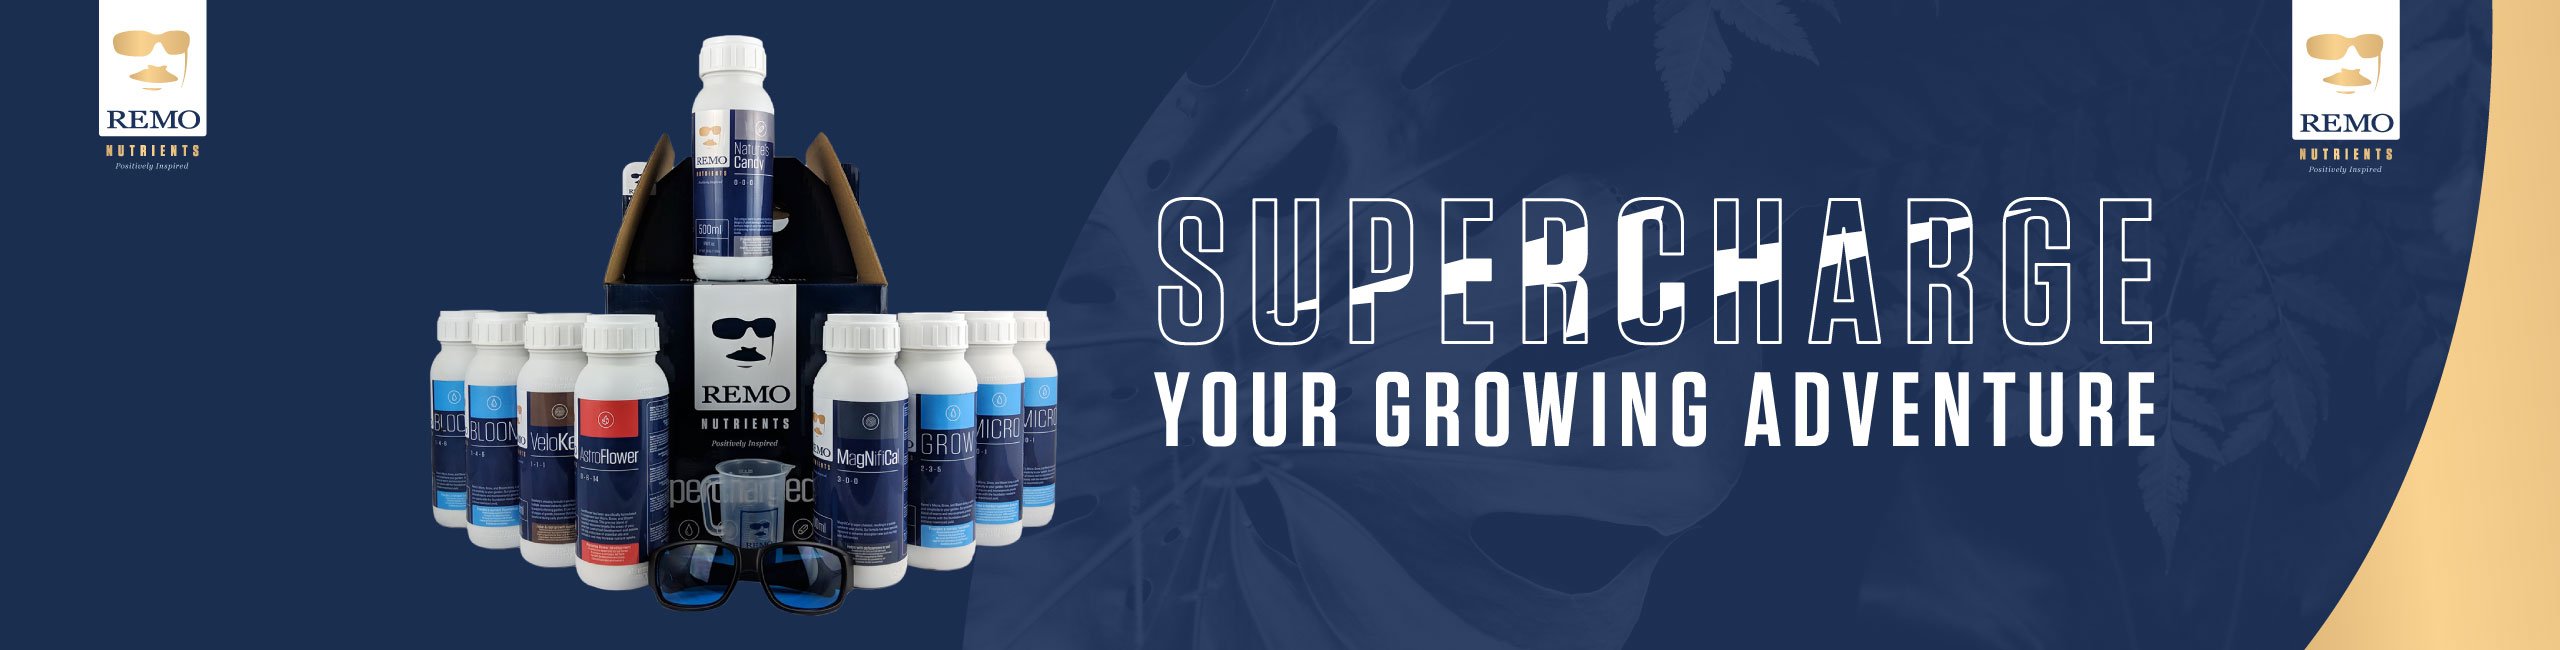 Remo Supercharge Your Growing Adventure